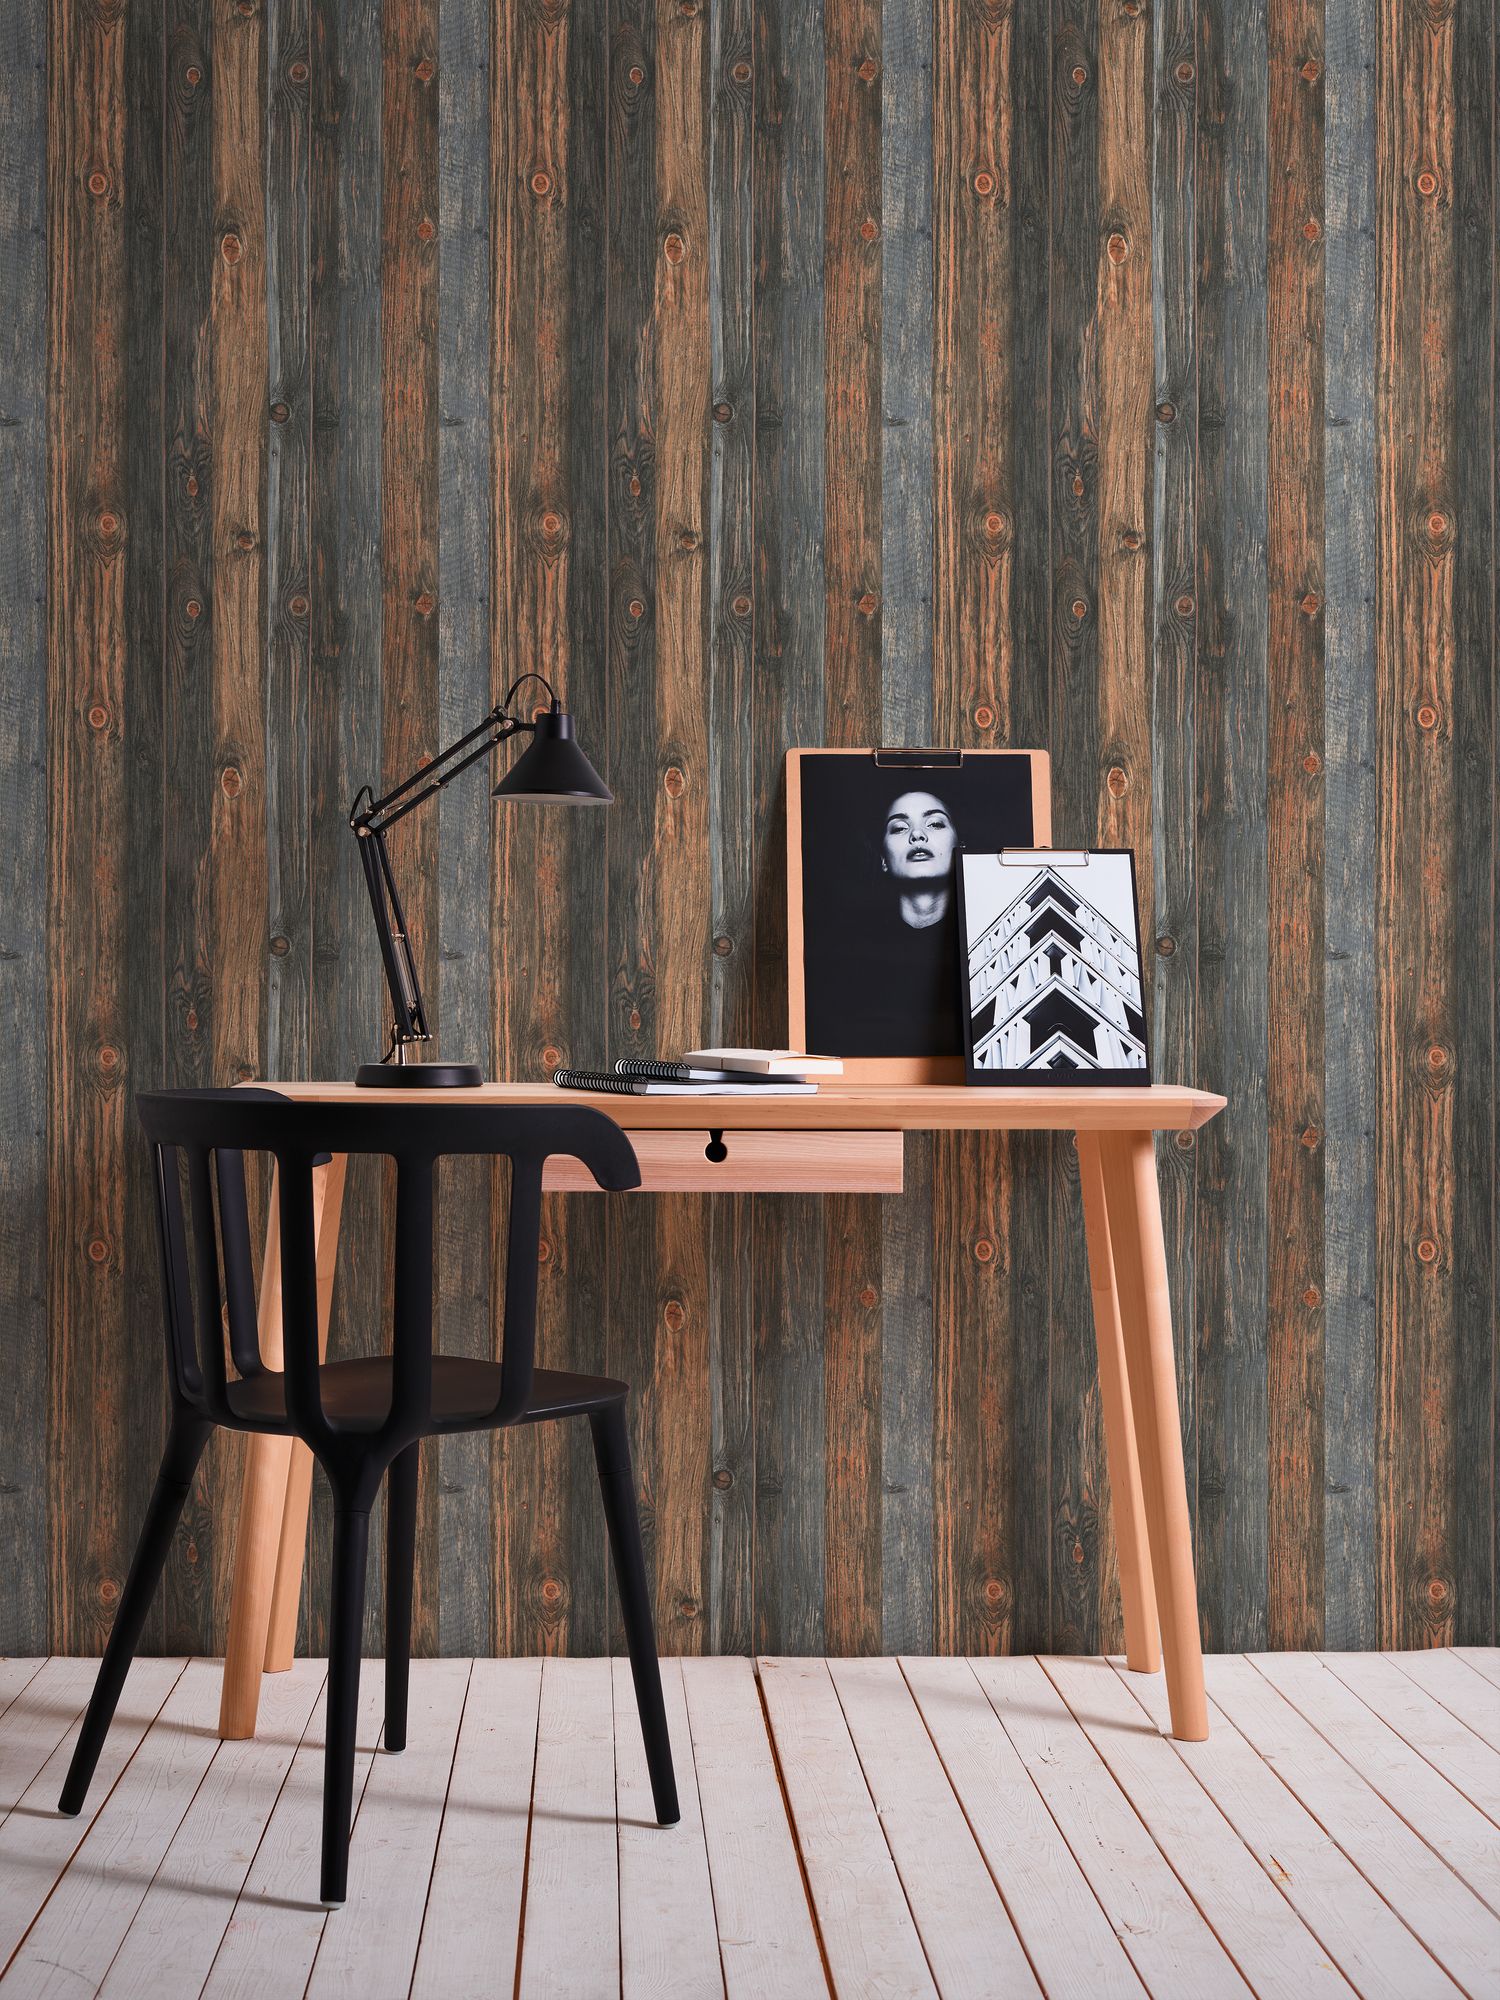 A.S. Création Best of Wood`n Stone 2nd Edition, Tapete in Holzoptik, braun, grau 908612